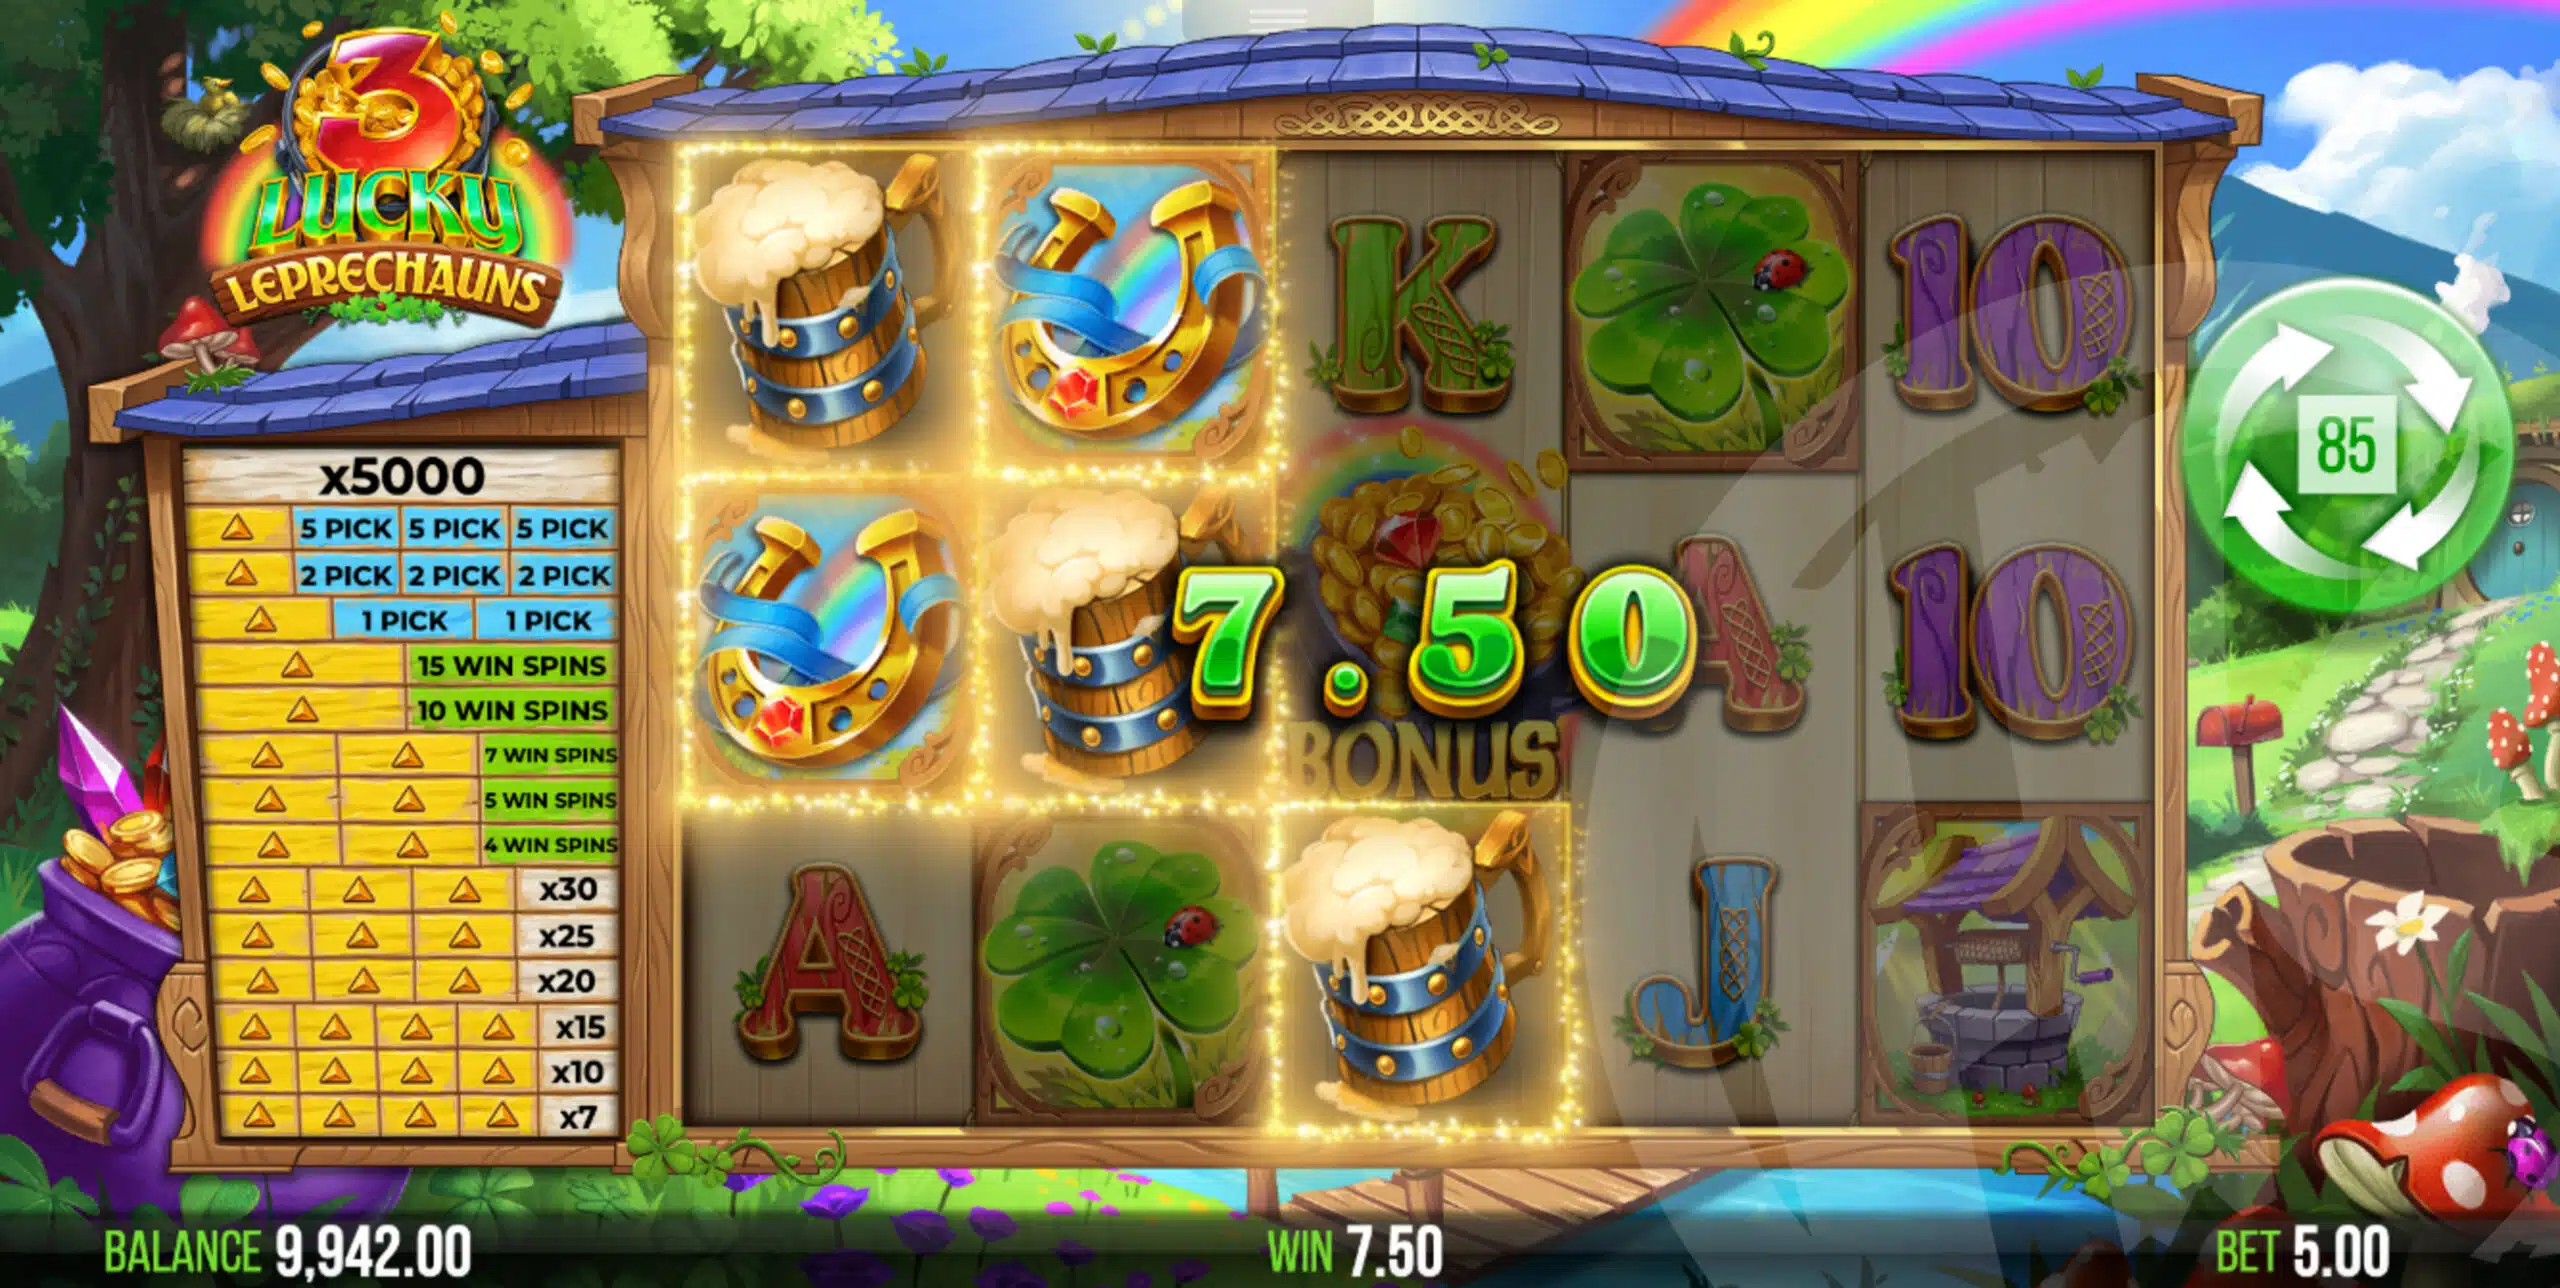 3 Lucky Leprechauns Offers Players 243 Ways to Win